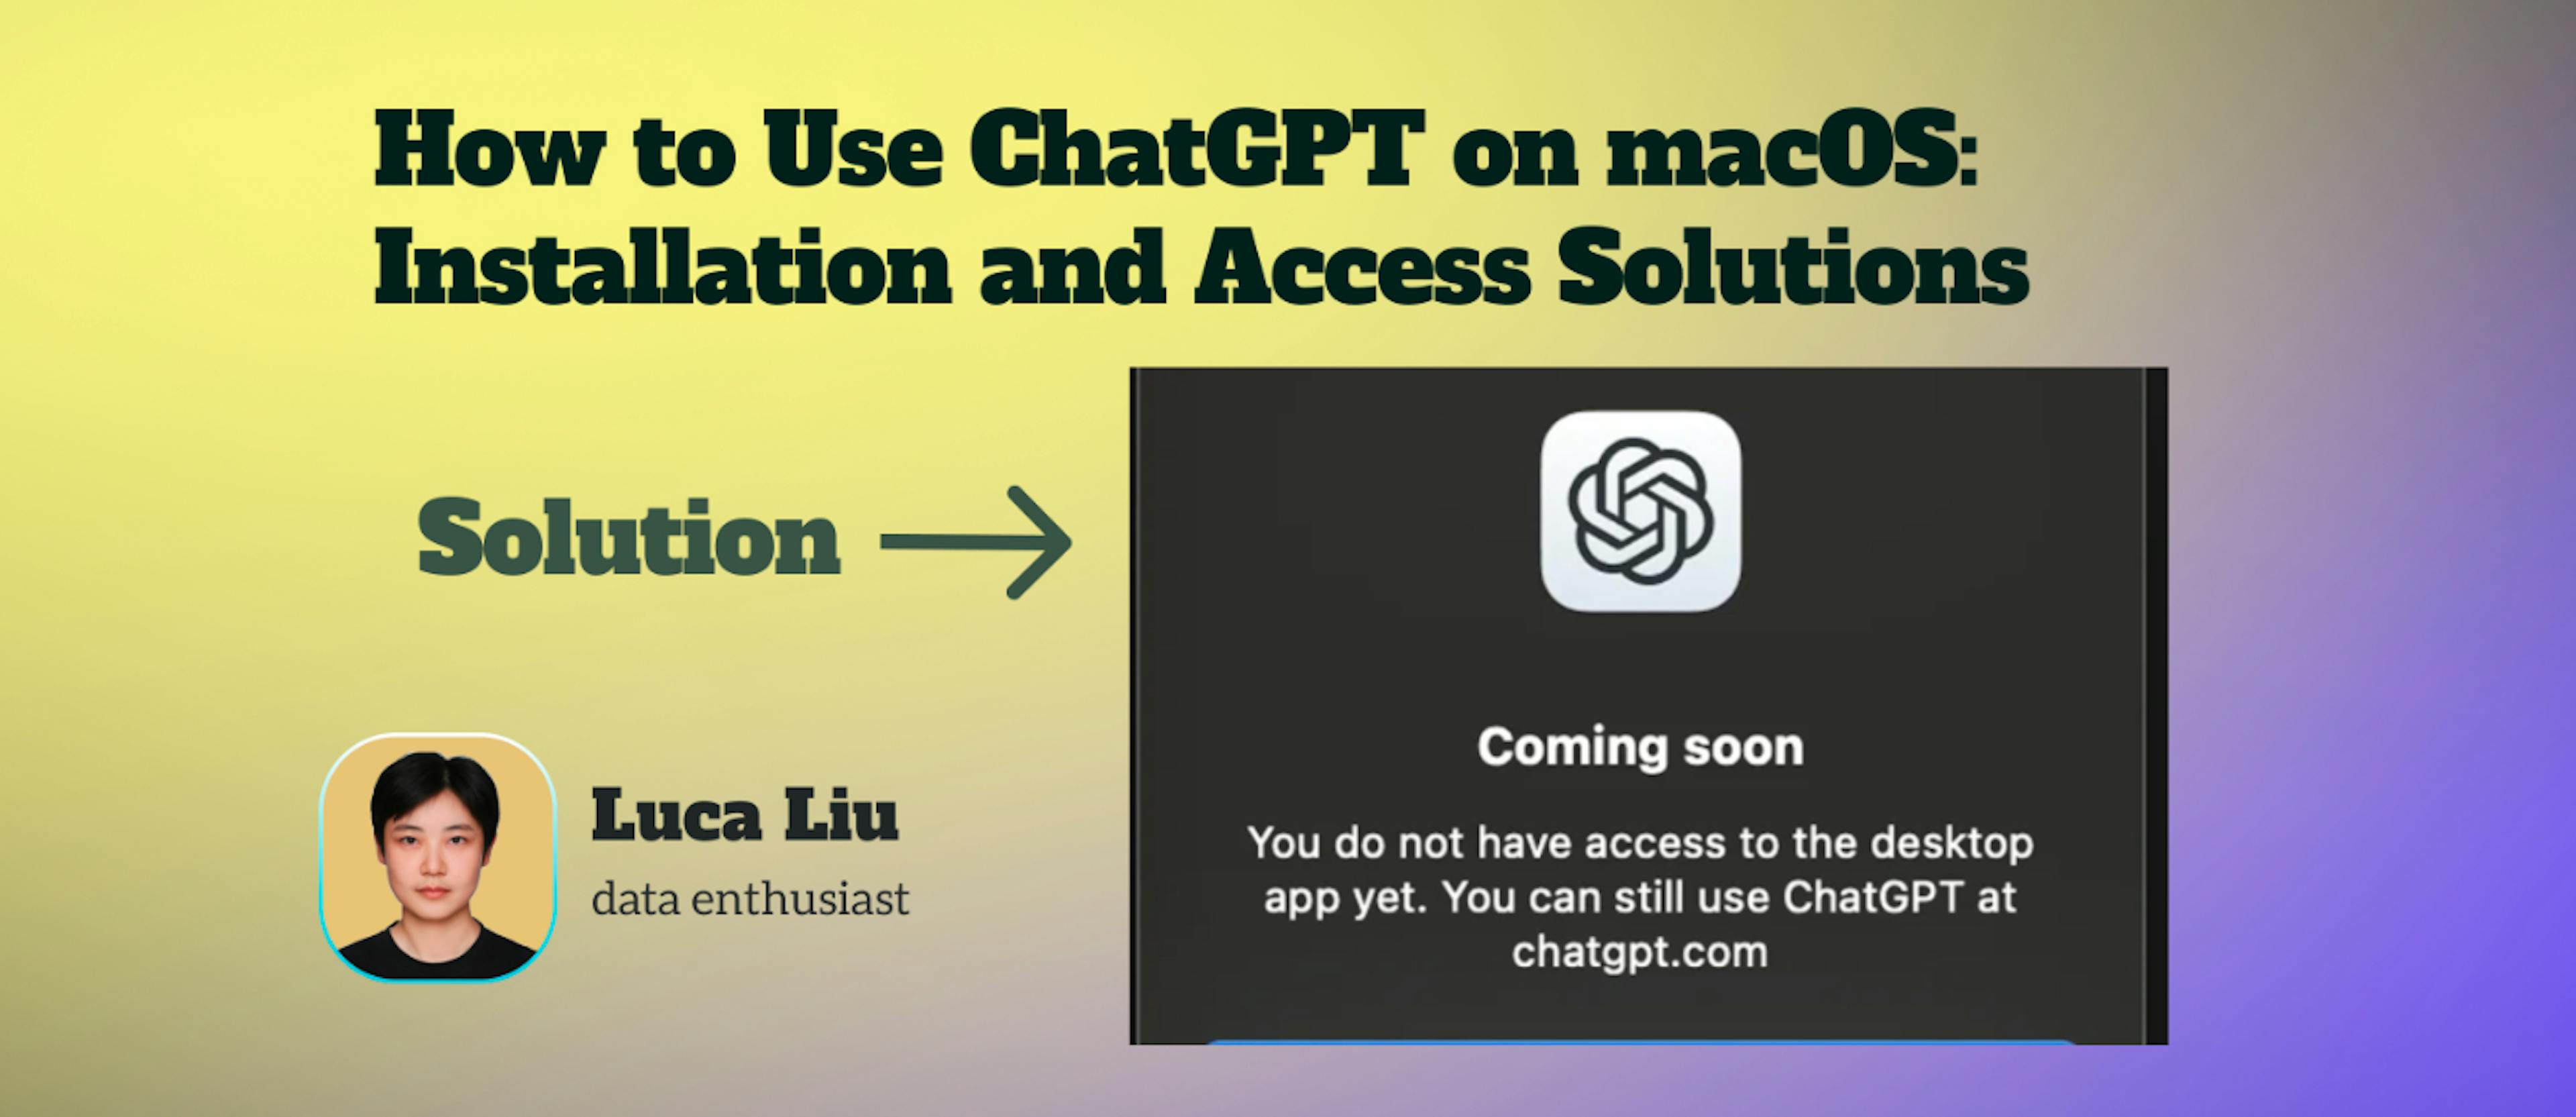 featured image - Getting Started With ChatGPT on MacOS: A Quick Guide to Installation